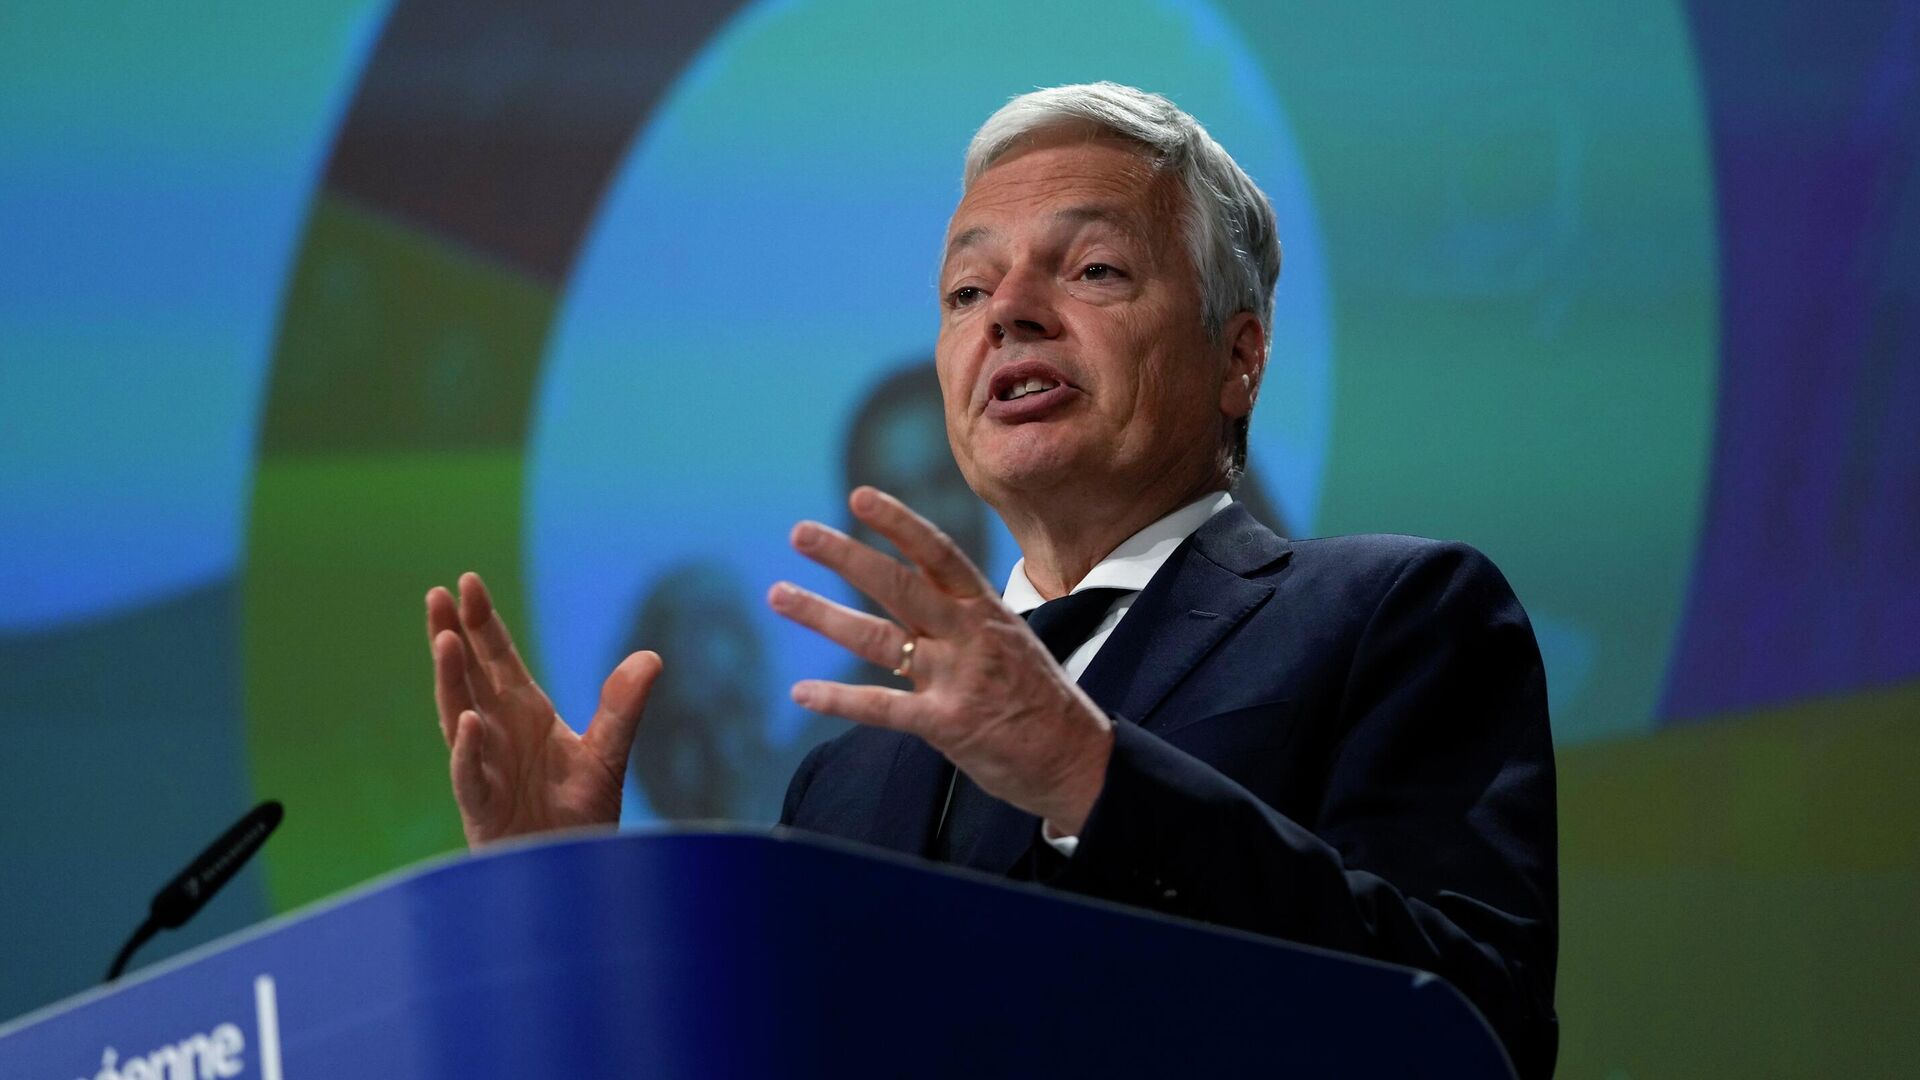 European Commissioner for Justice Didier Reynders speaks during a news conference following a weekly College of Commissioners meeting at the EU headquarters in Brussels, Wednesday, June 30, 2021 - Sputnik International, 1920, 11.05.2022